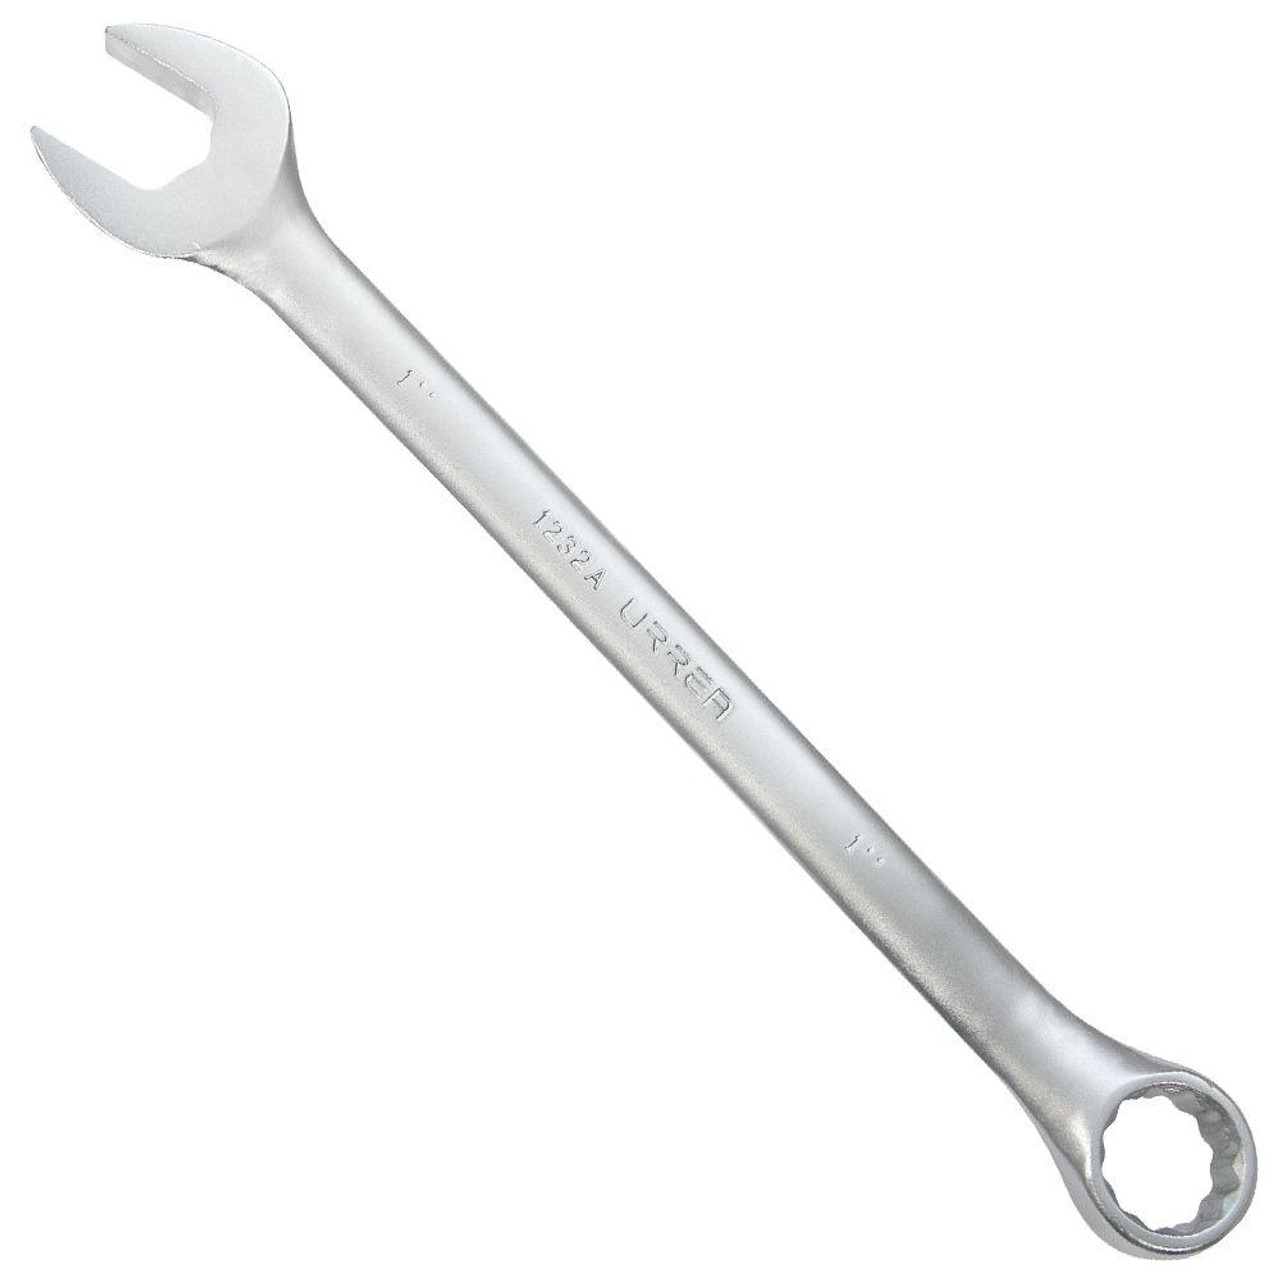 Satin finish combination wrench, Size: 1-5/16, 12 point, Tool Length: 18-5/8"